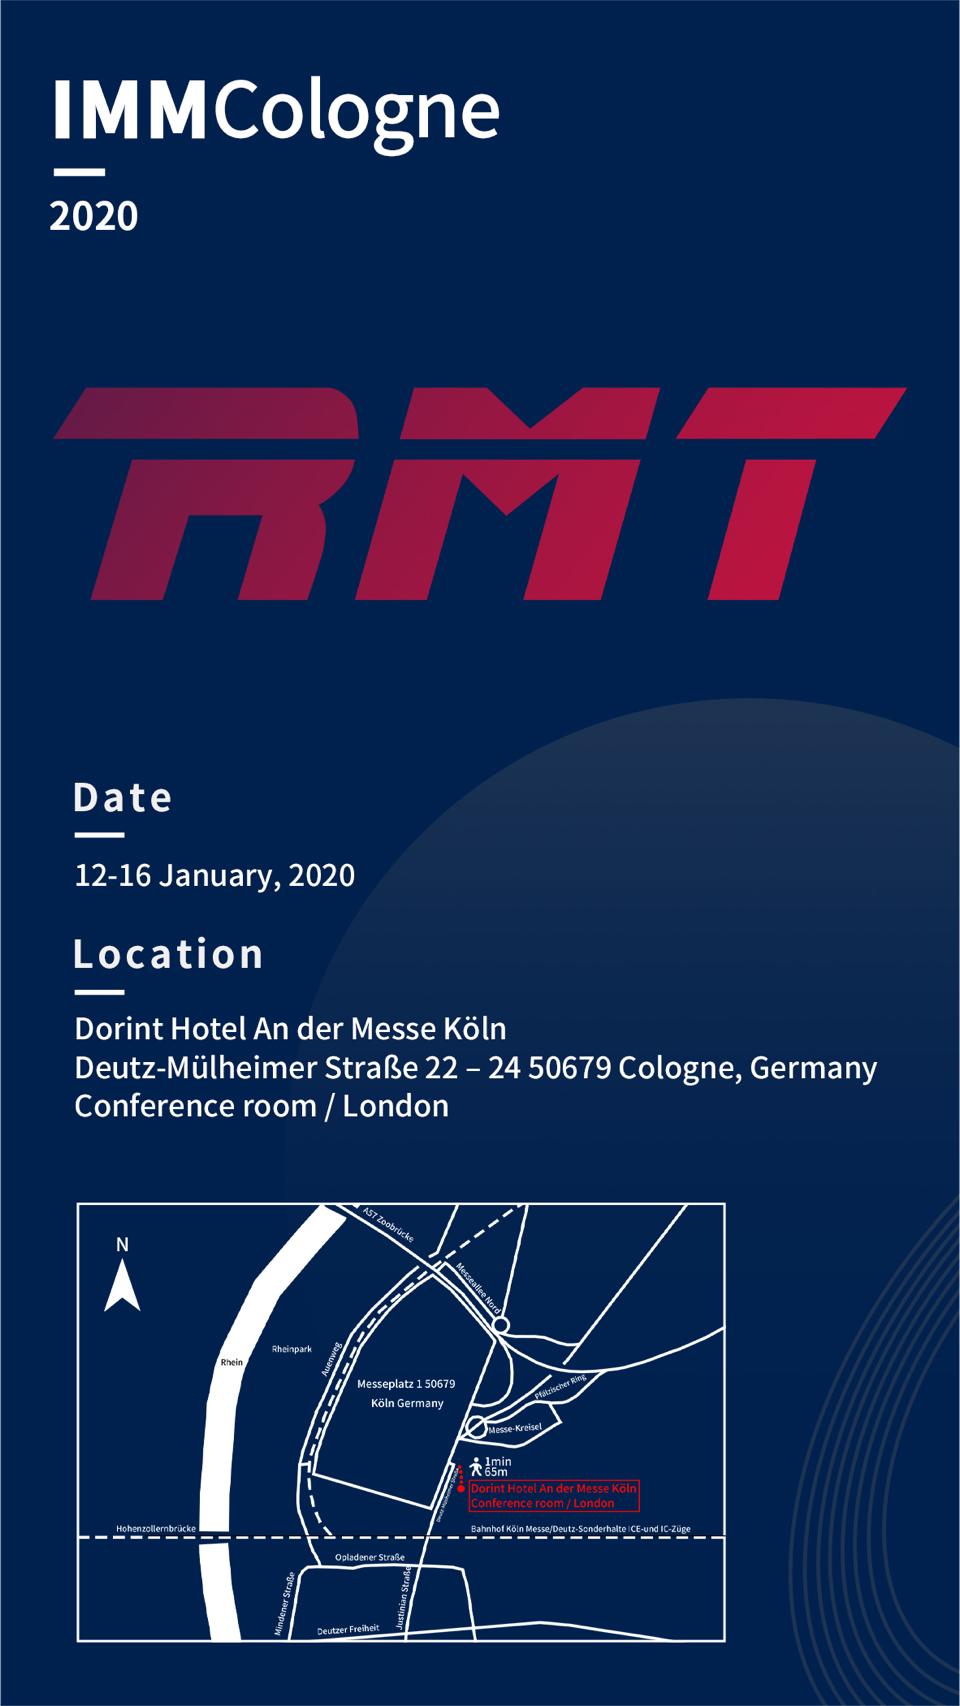 RMT at the DORINT HOTEL FOR 2020 IMM IN COLOGNE